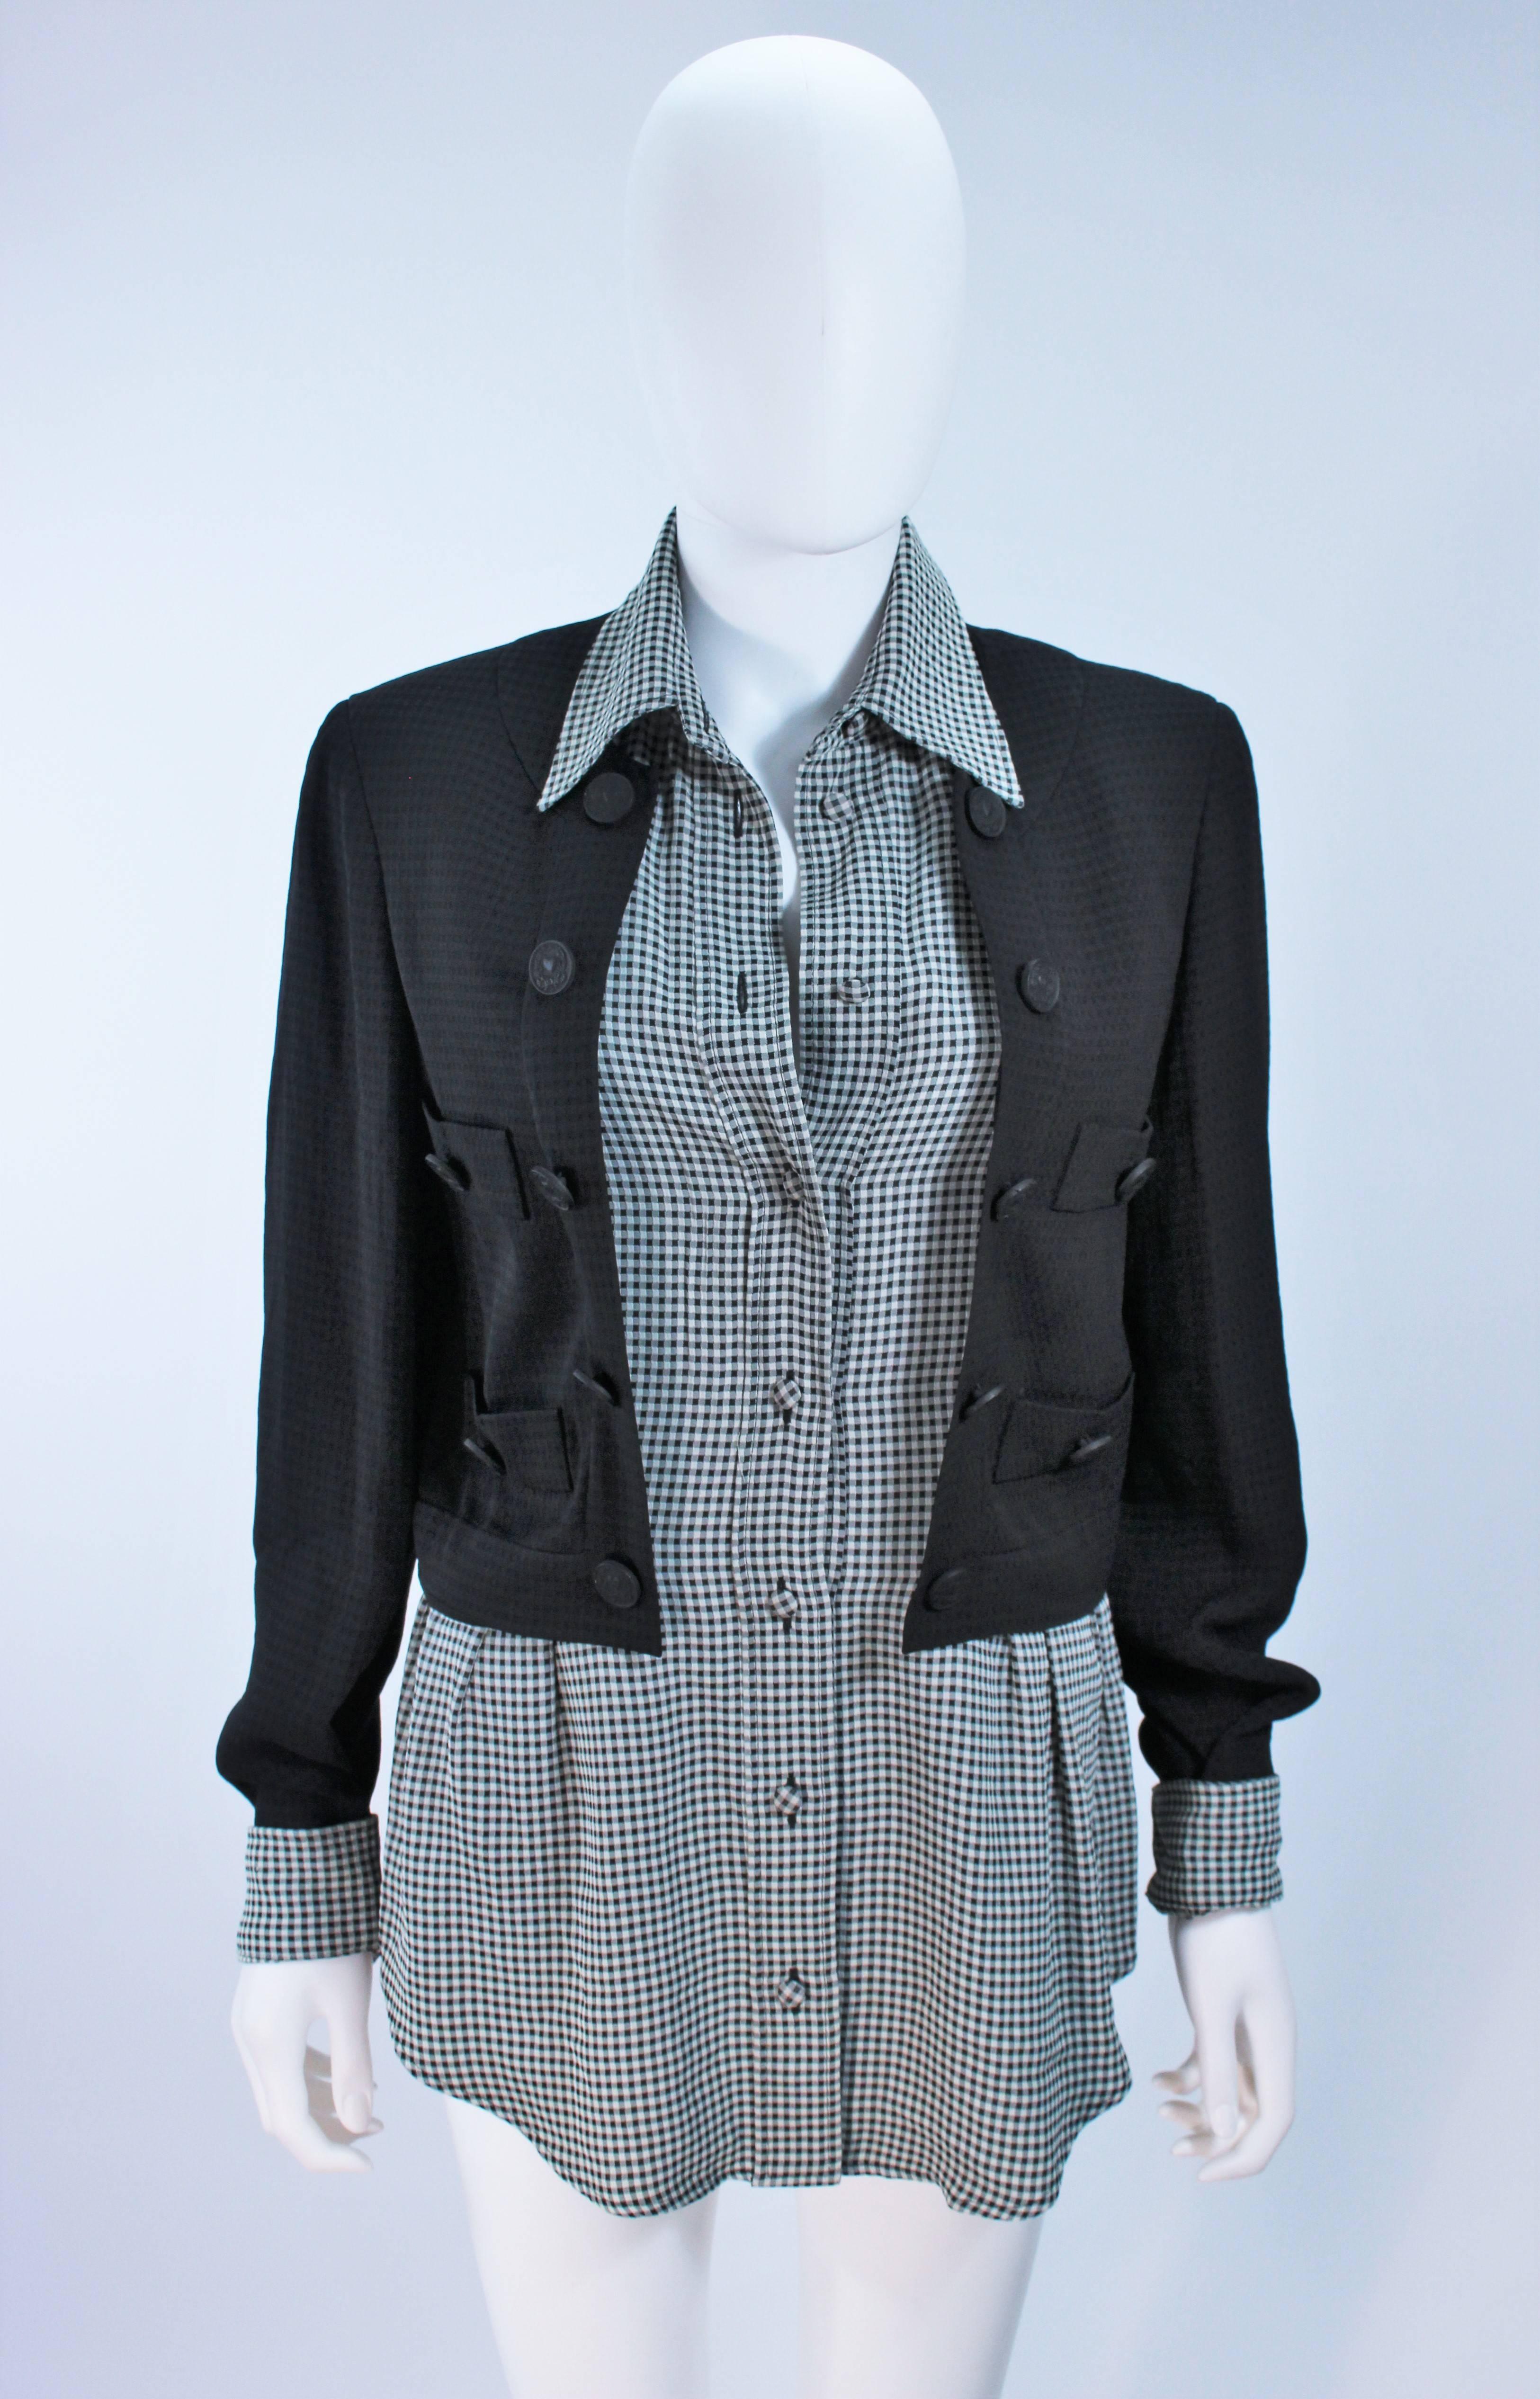  This Moschino jacket is composed of a black exterior jacket and features a plaid silk interior attached shirt. There are center front button closures. In great vintage condition. 

  **Please cross-reference measurements for personal accuracy.